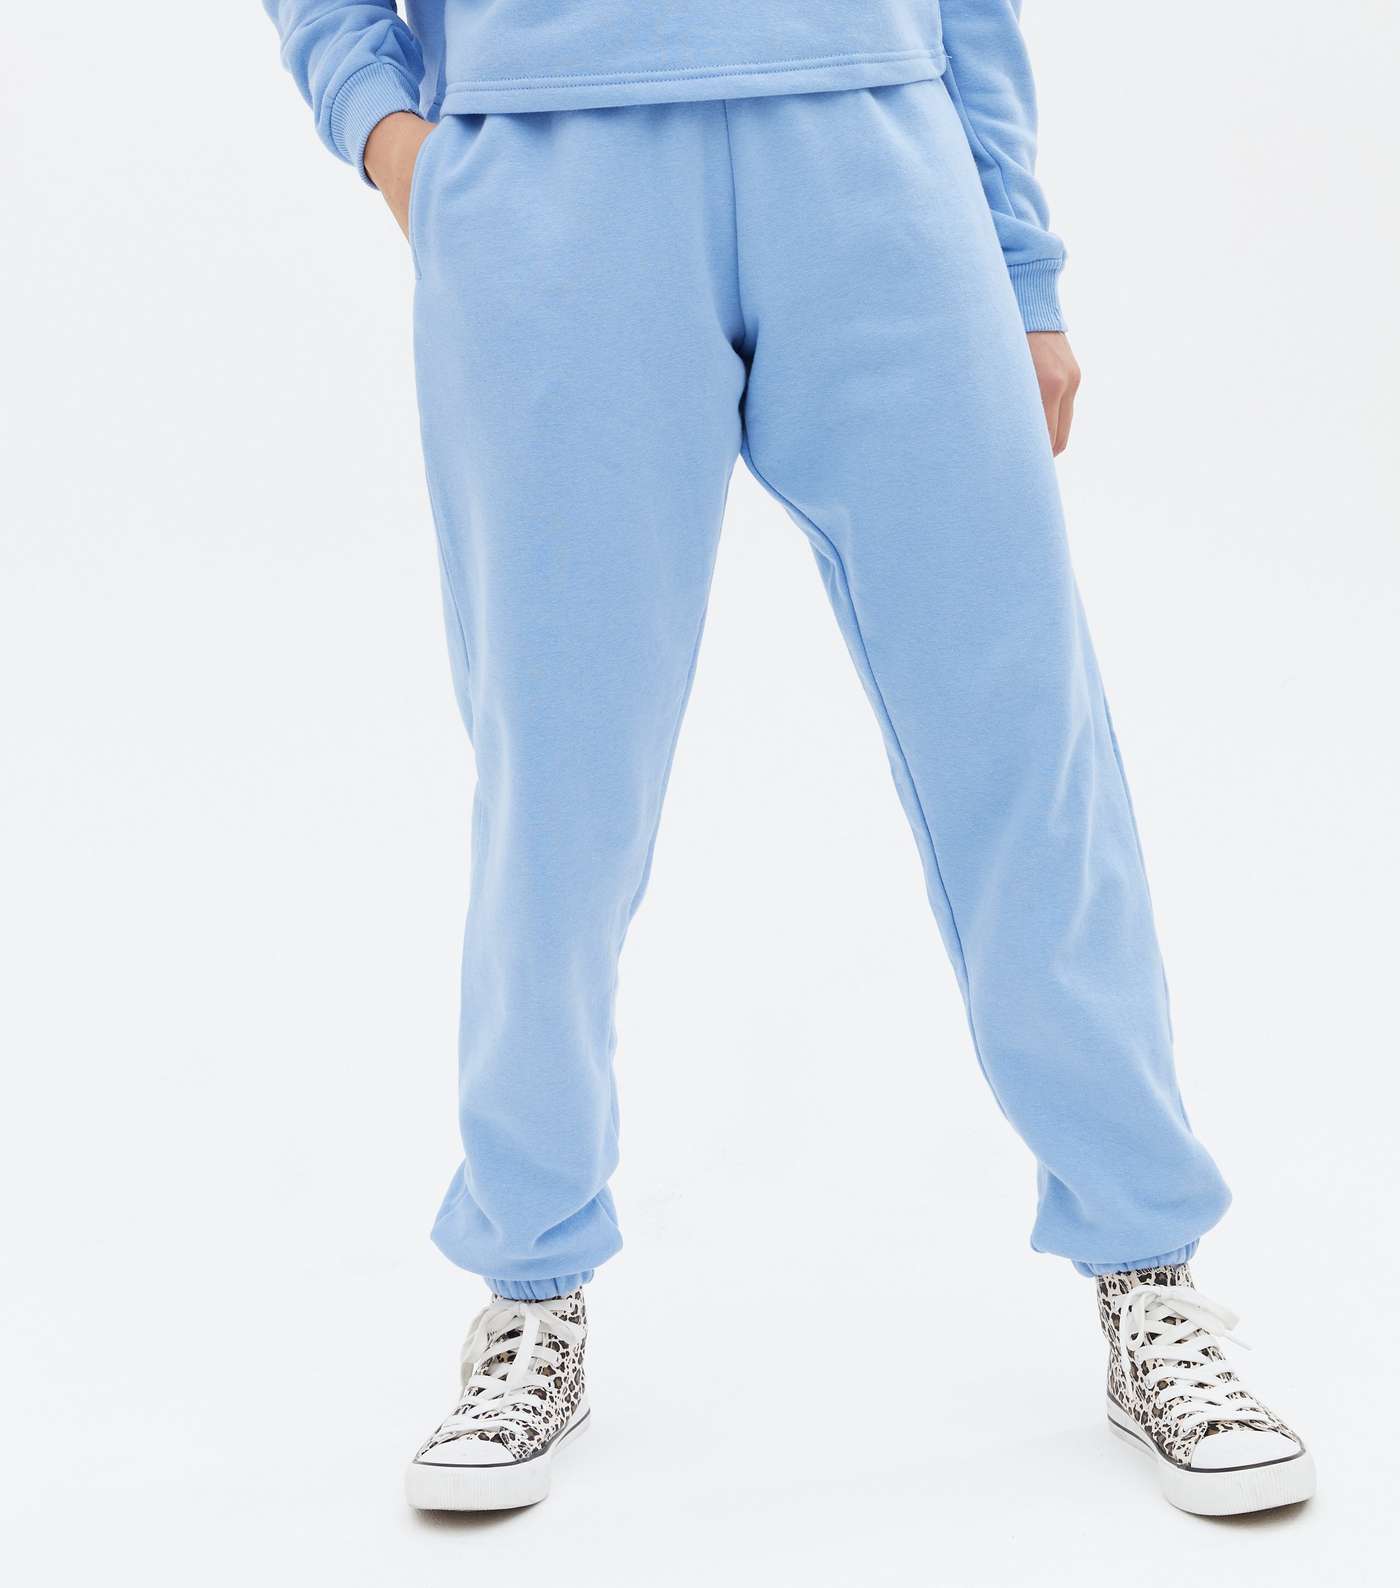 Girls 2 Pack Pale Blue and Grey Cuffed Joggers Image 2